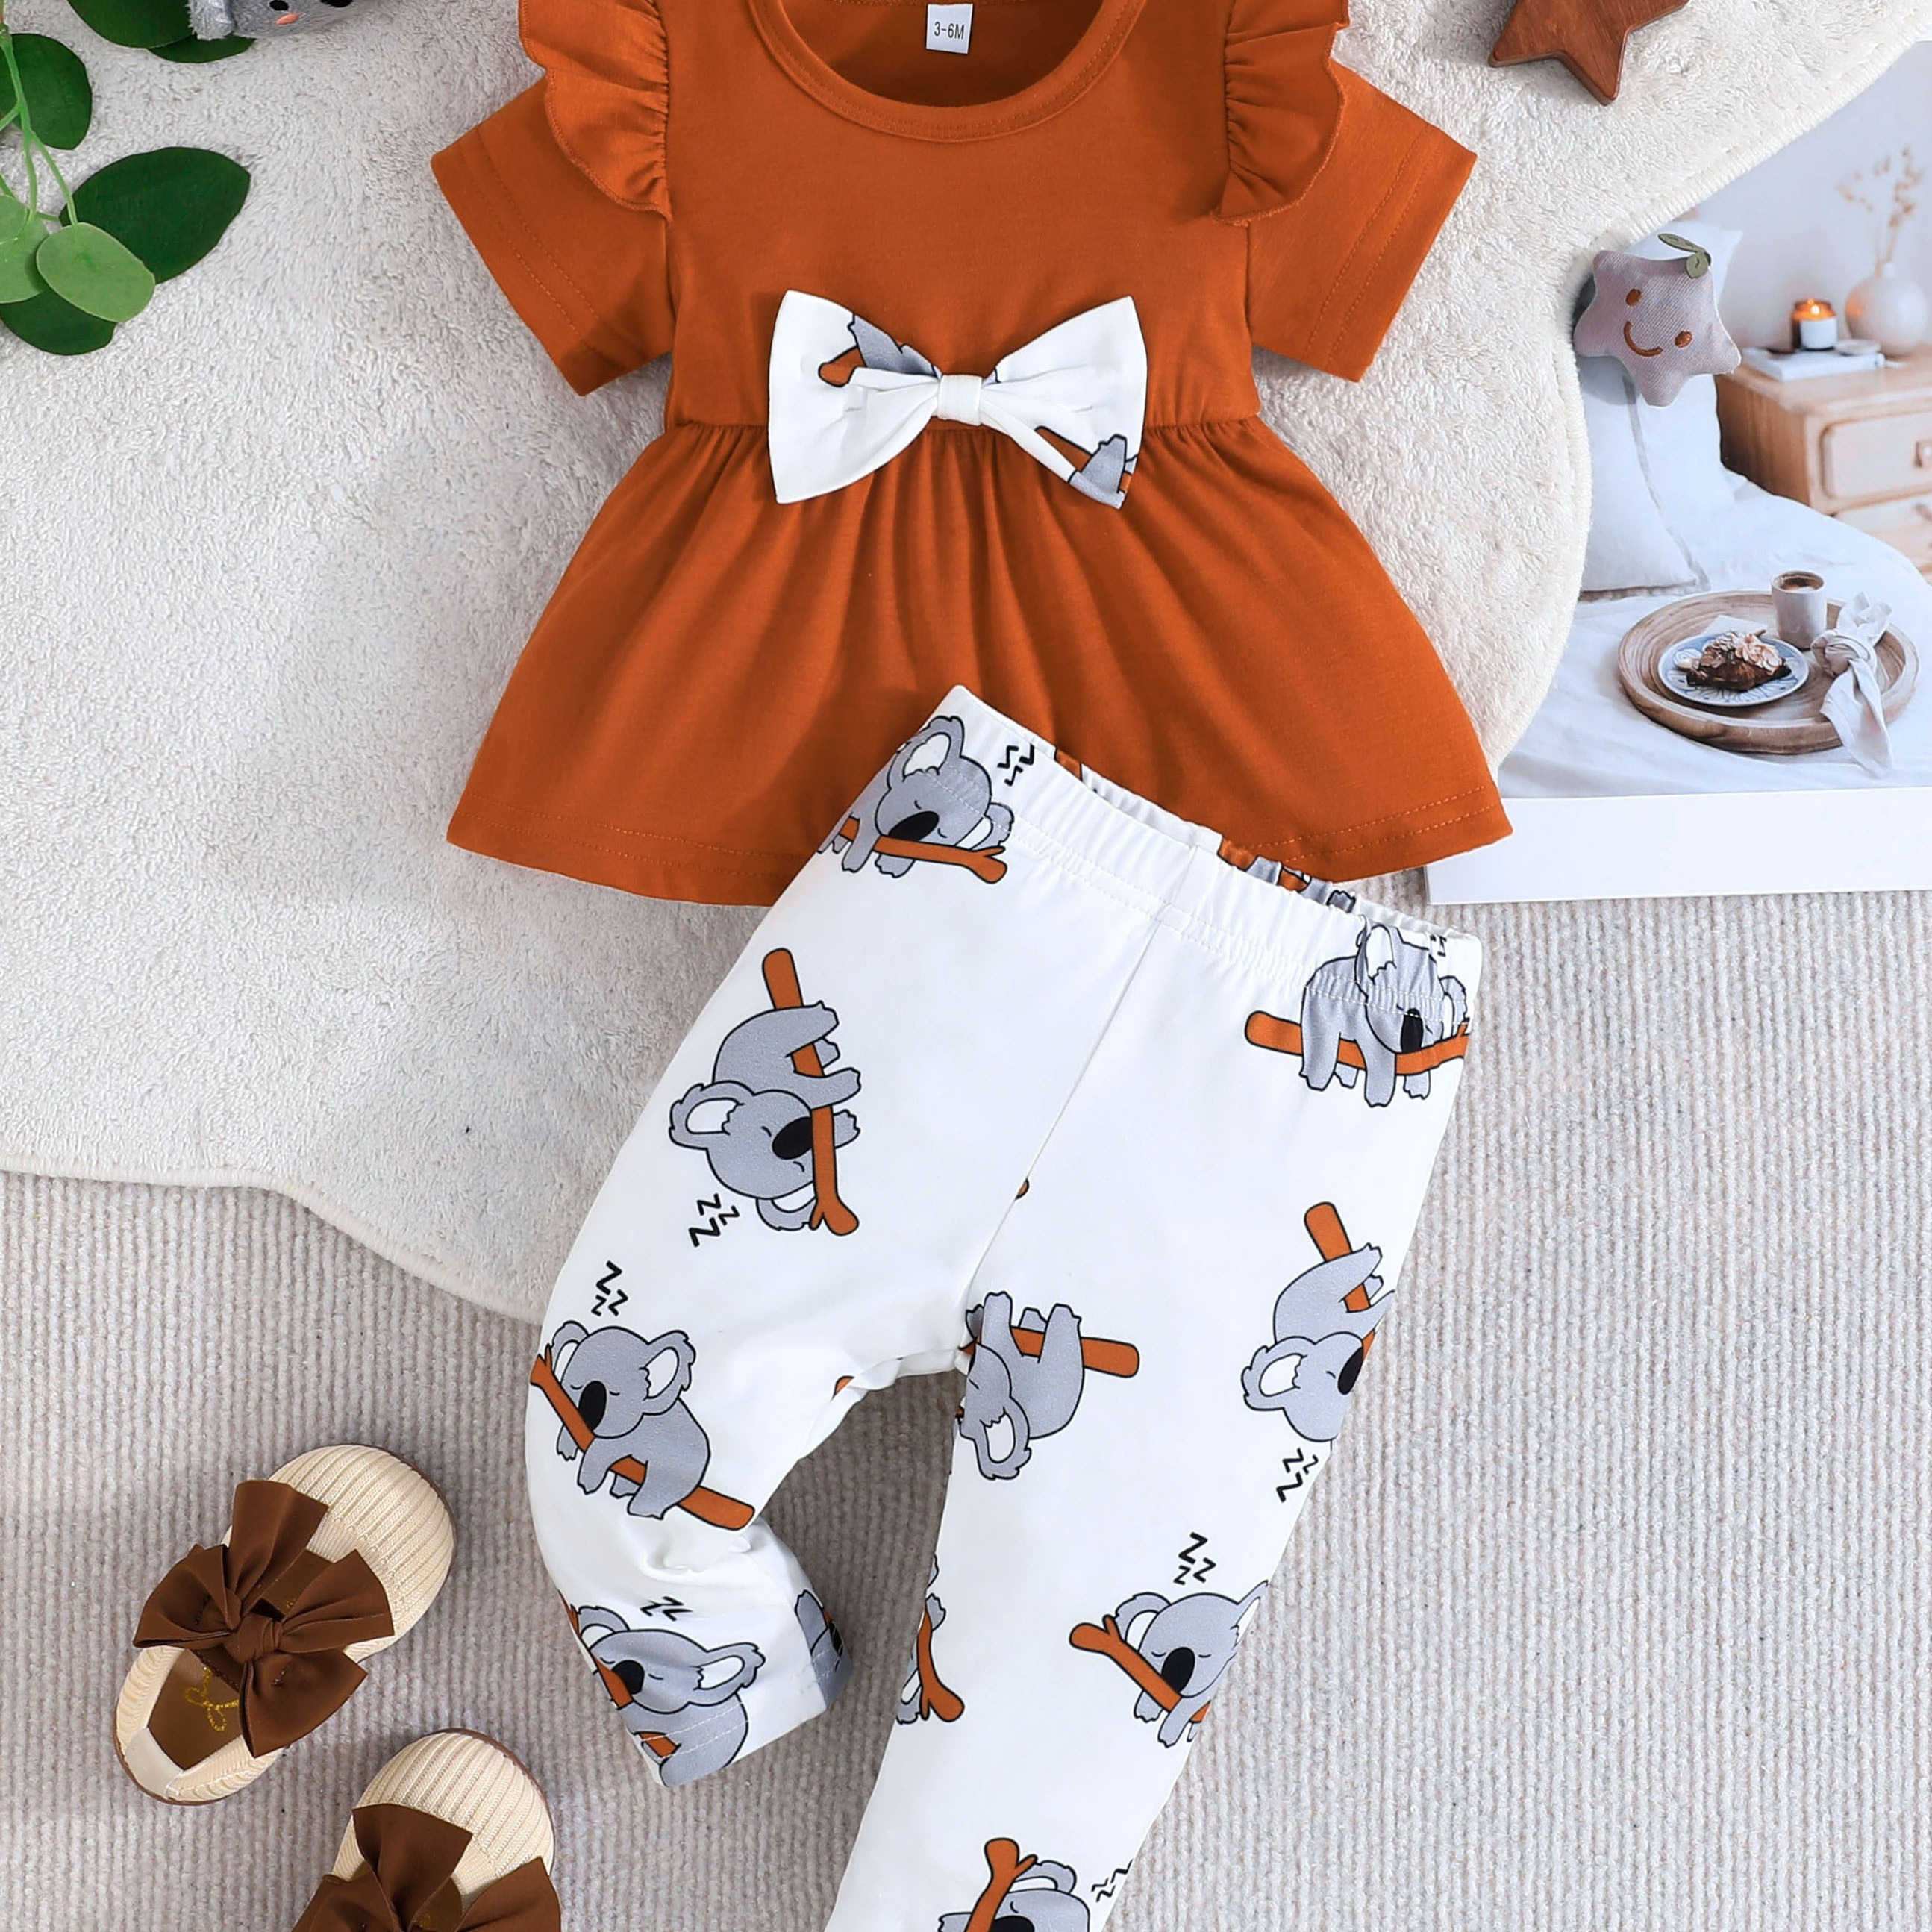 

Baby's Cartoon Koala Print 2pcs Casual Outfit, Short Sleeve Peplum Top & Pants Set, Toddler & Infant Girl's Clothes For Daily/holiday/party